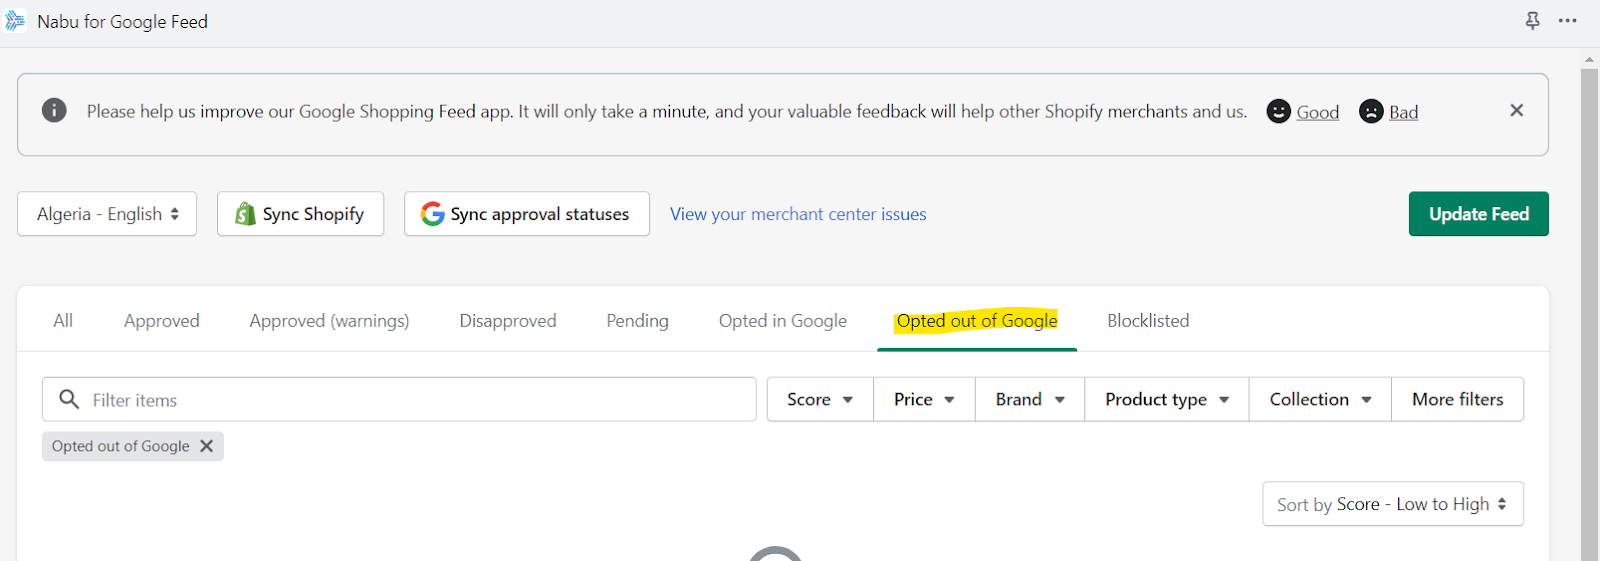 exclude products from Google shopping feed data
